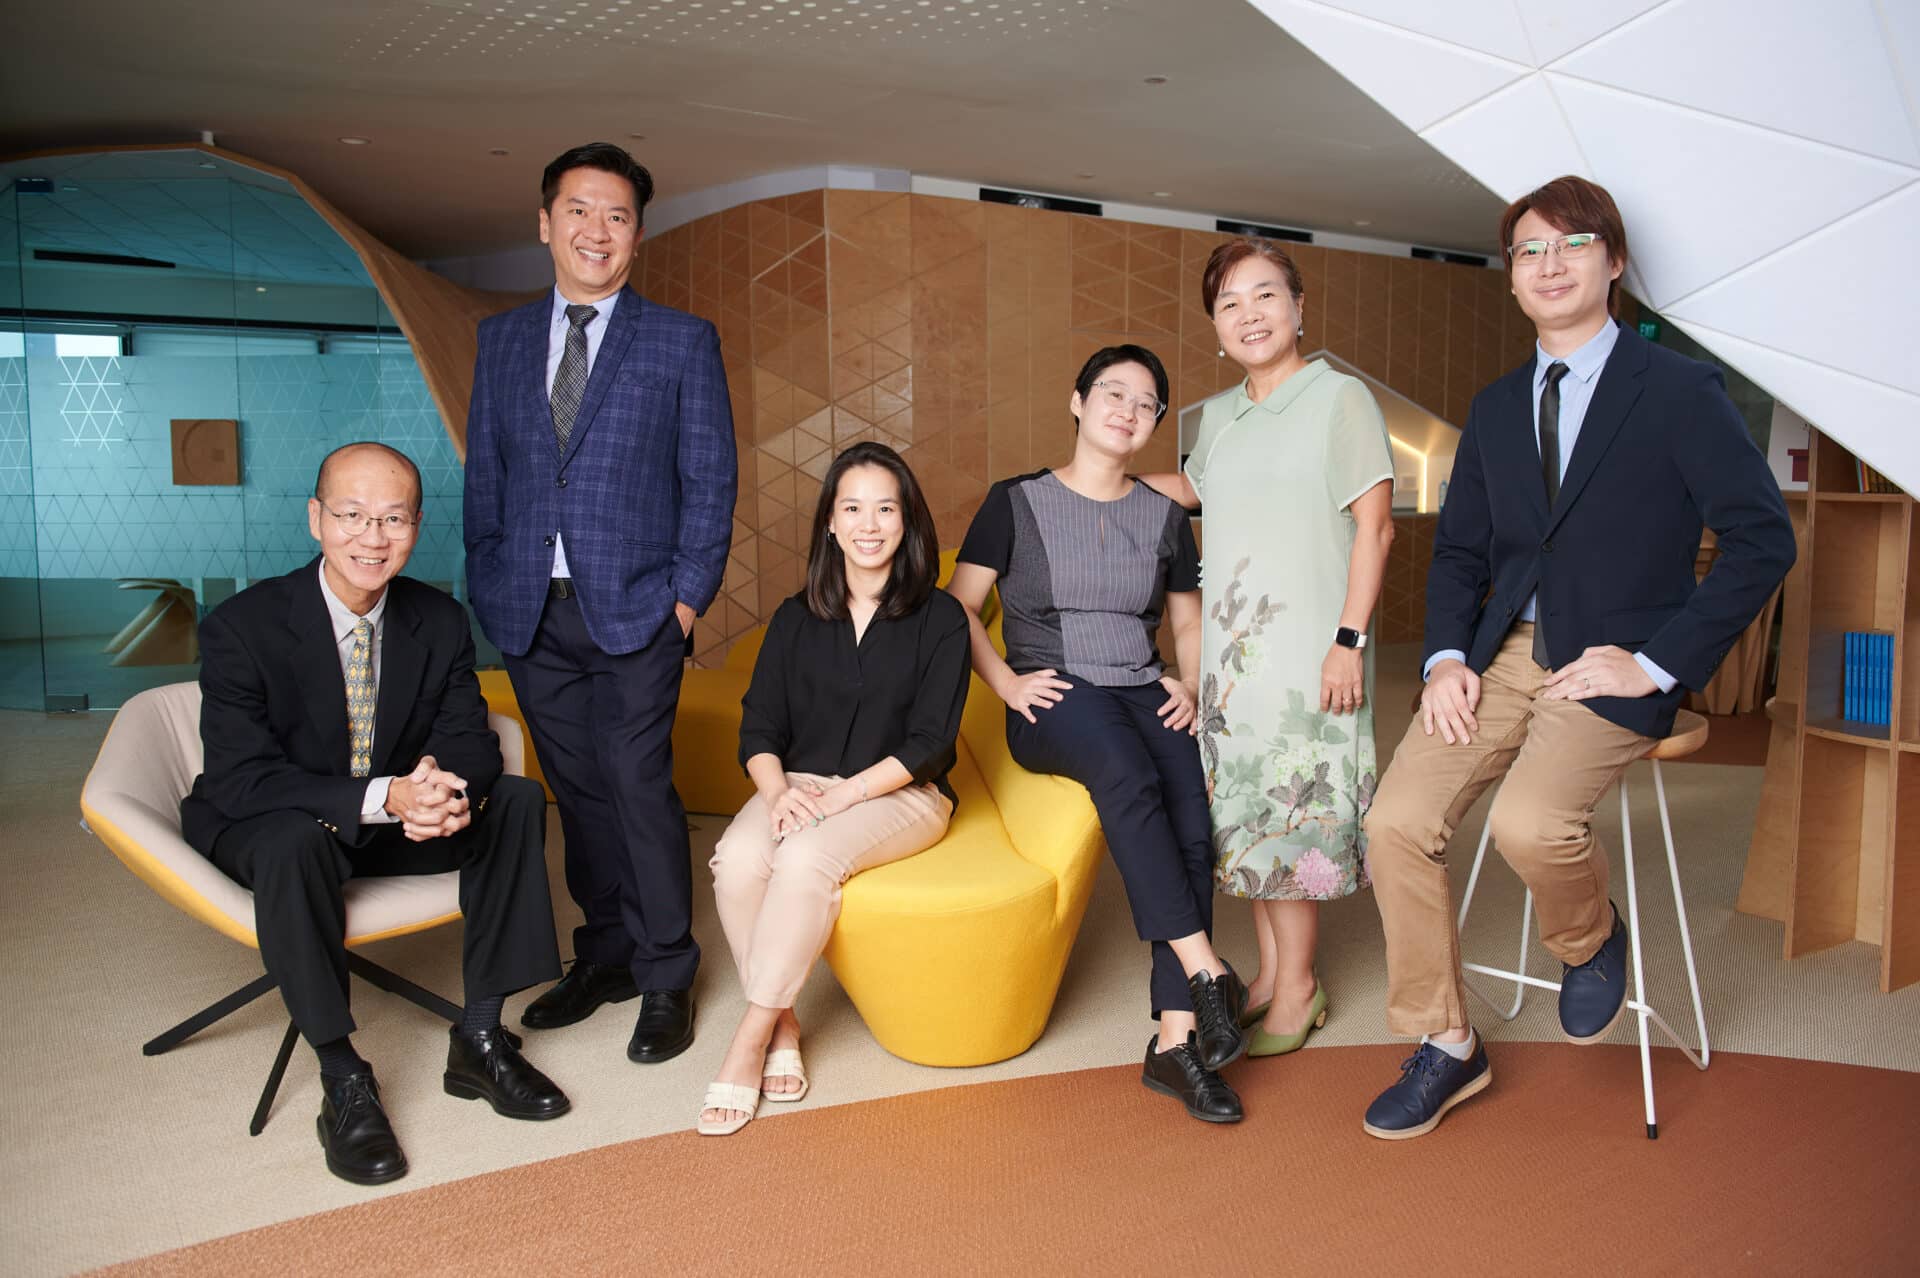 Left to right: Mr Lee Jiak Jee (Executive), Mr Giam Cheong Leong (Executive Director), Ms Trudy Giam (Executive), Ms Zhang Fan (Admin), Ms Jessica Goh (Executive) and Mr Cheng Tah Nern (Executive)